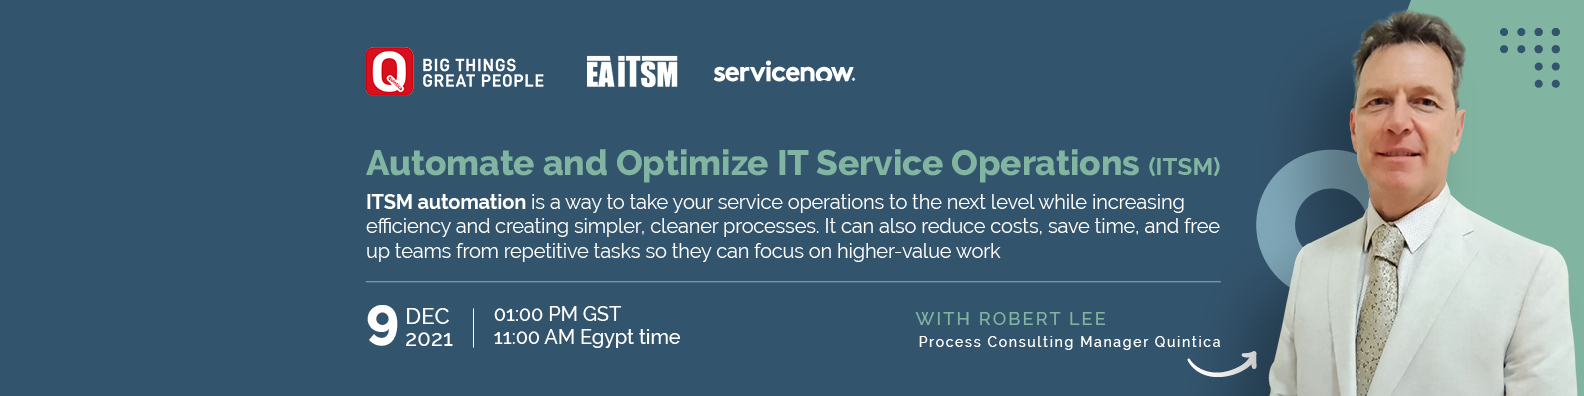 ServiceNow Webinar - Automate and Optimize IT Service Operations - (ITSM) 